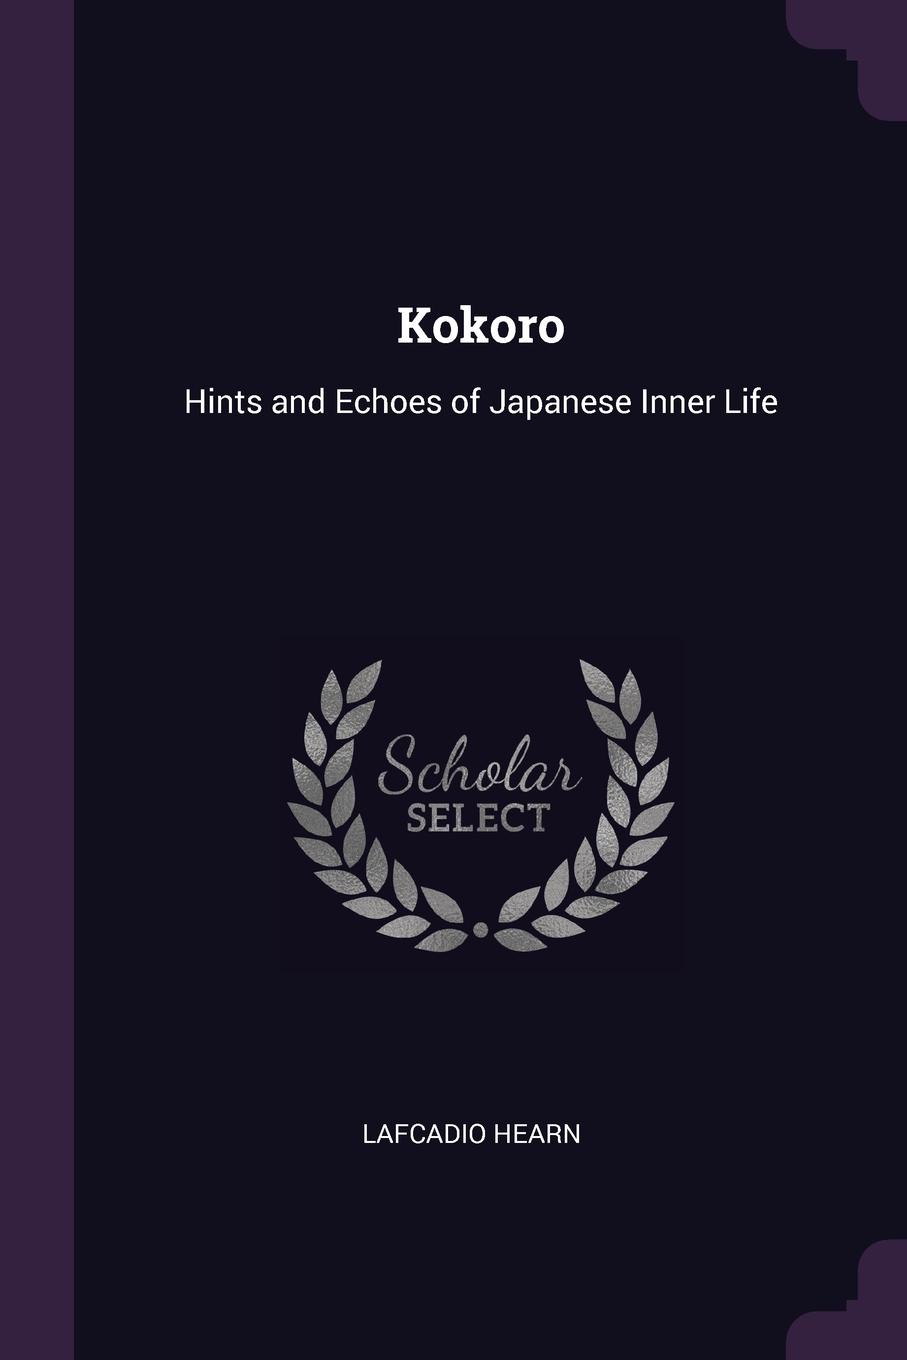 Kokoro. Hints and Echoes of Japanese Inner Life